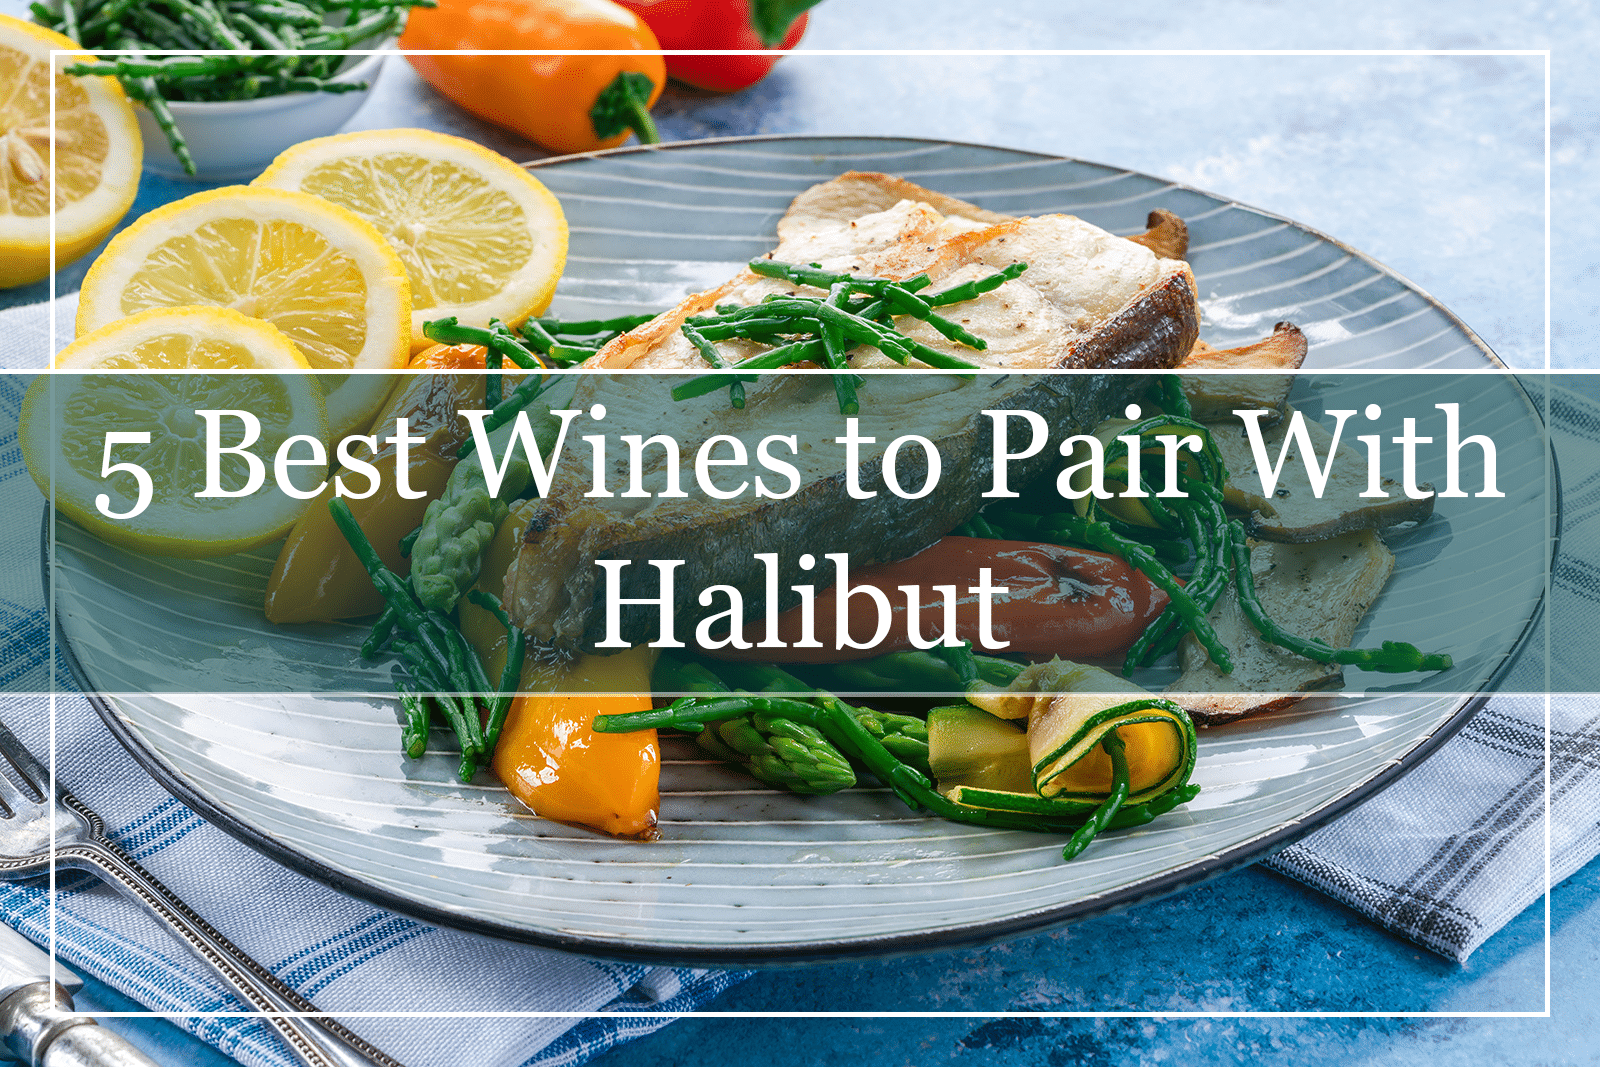 5 Best Wines to Pair With Halibut (2021)